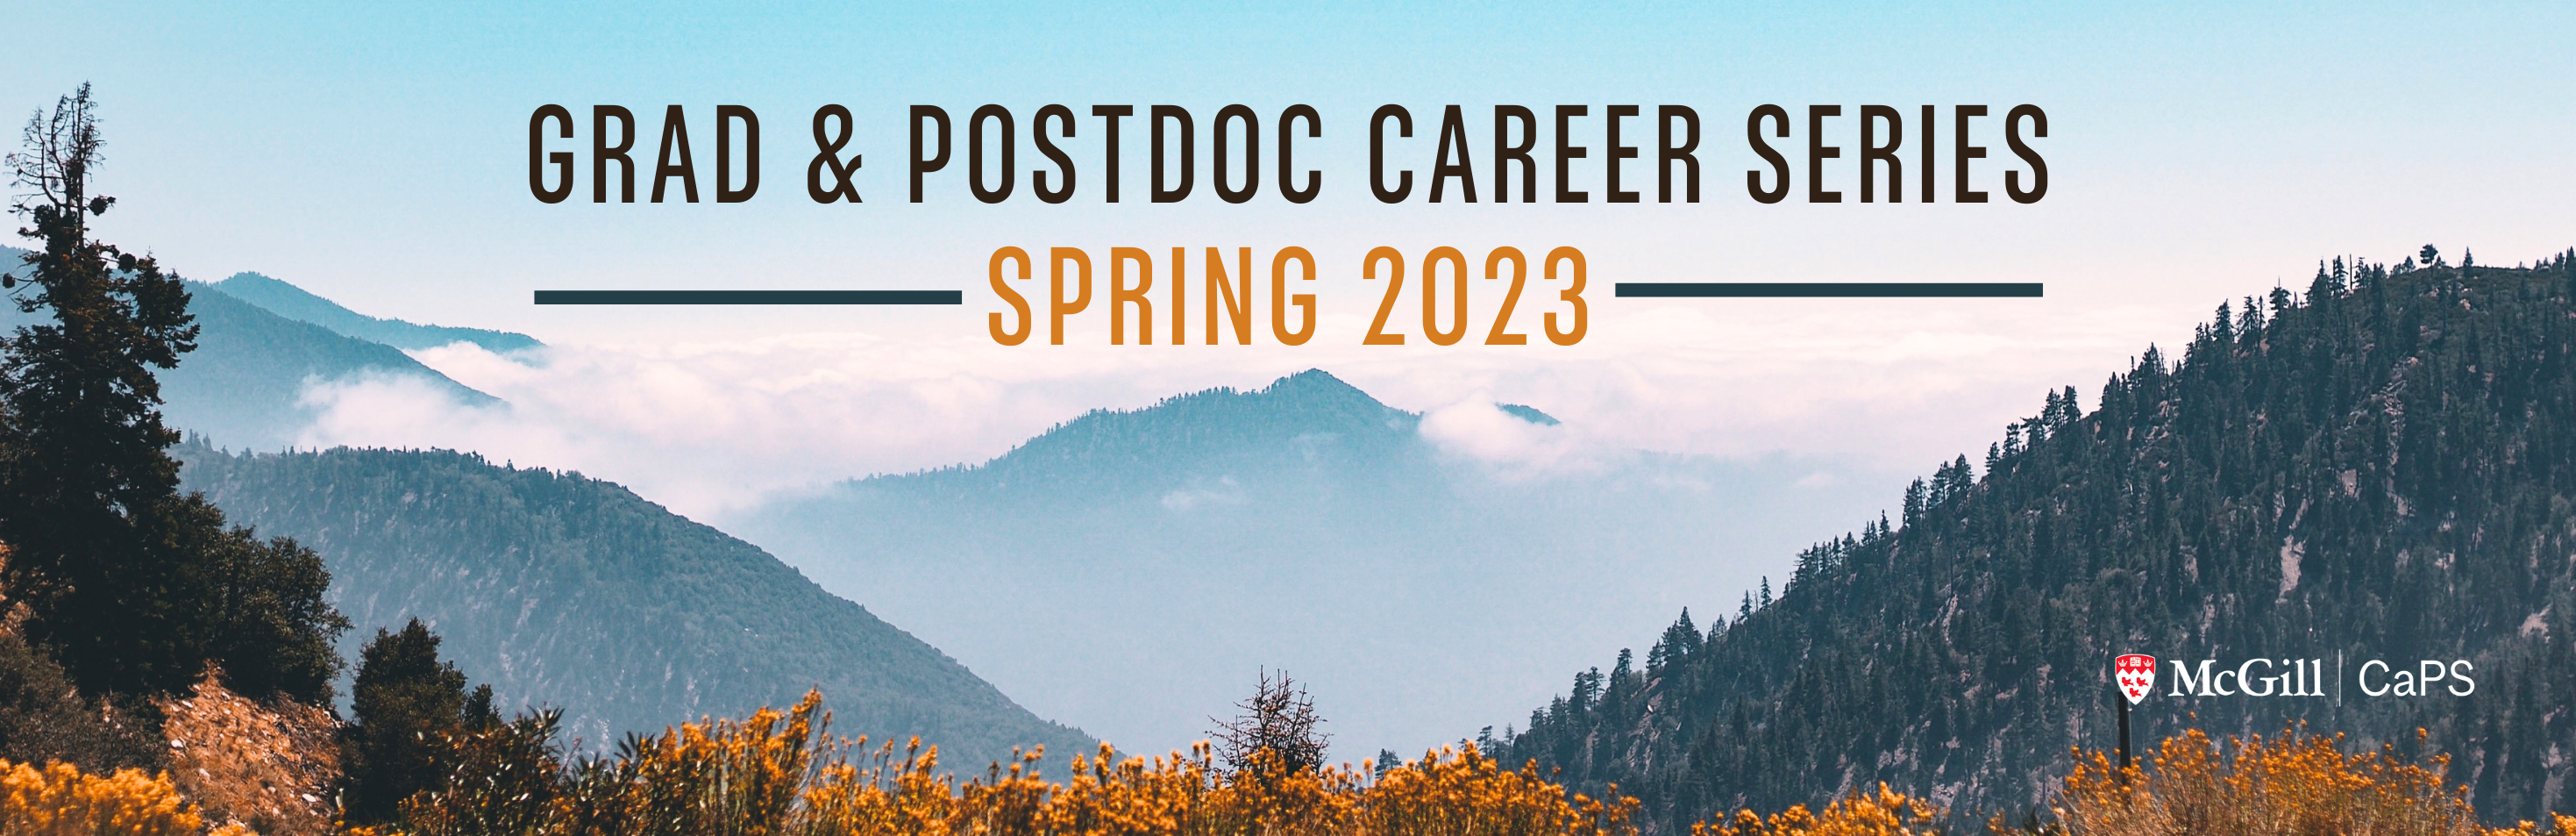 Smokey mountain landscape with the title "Grad and Postdoc Career Series - Spring 2023" 